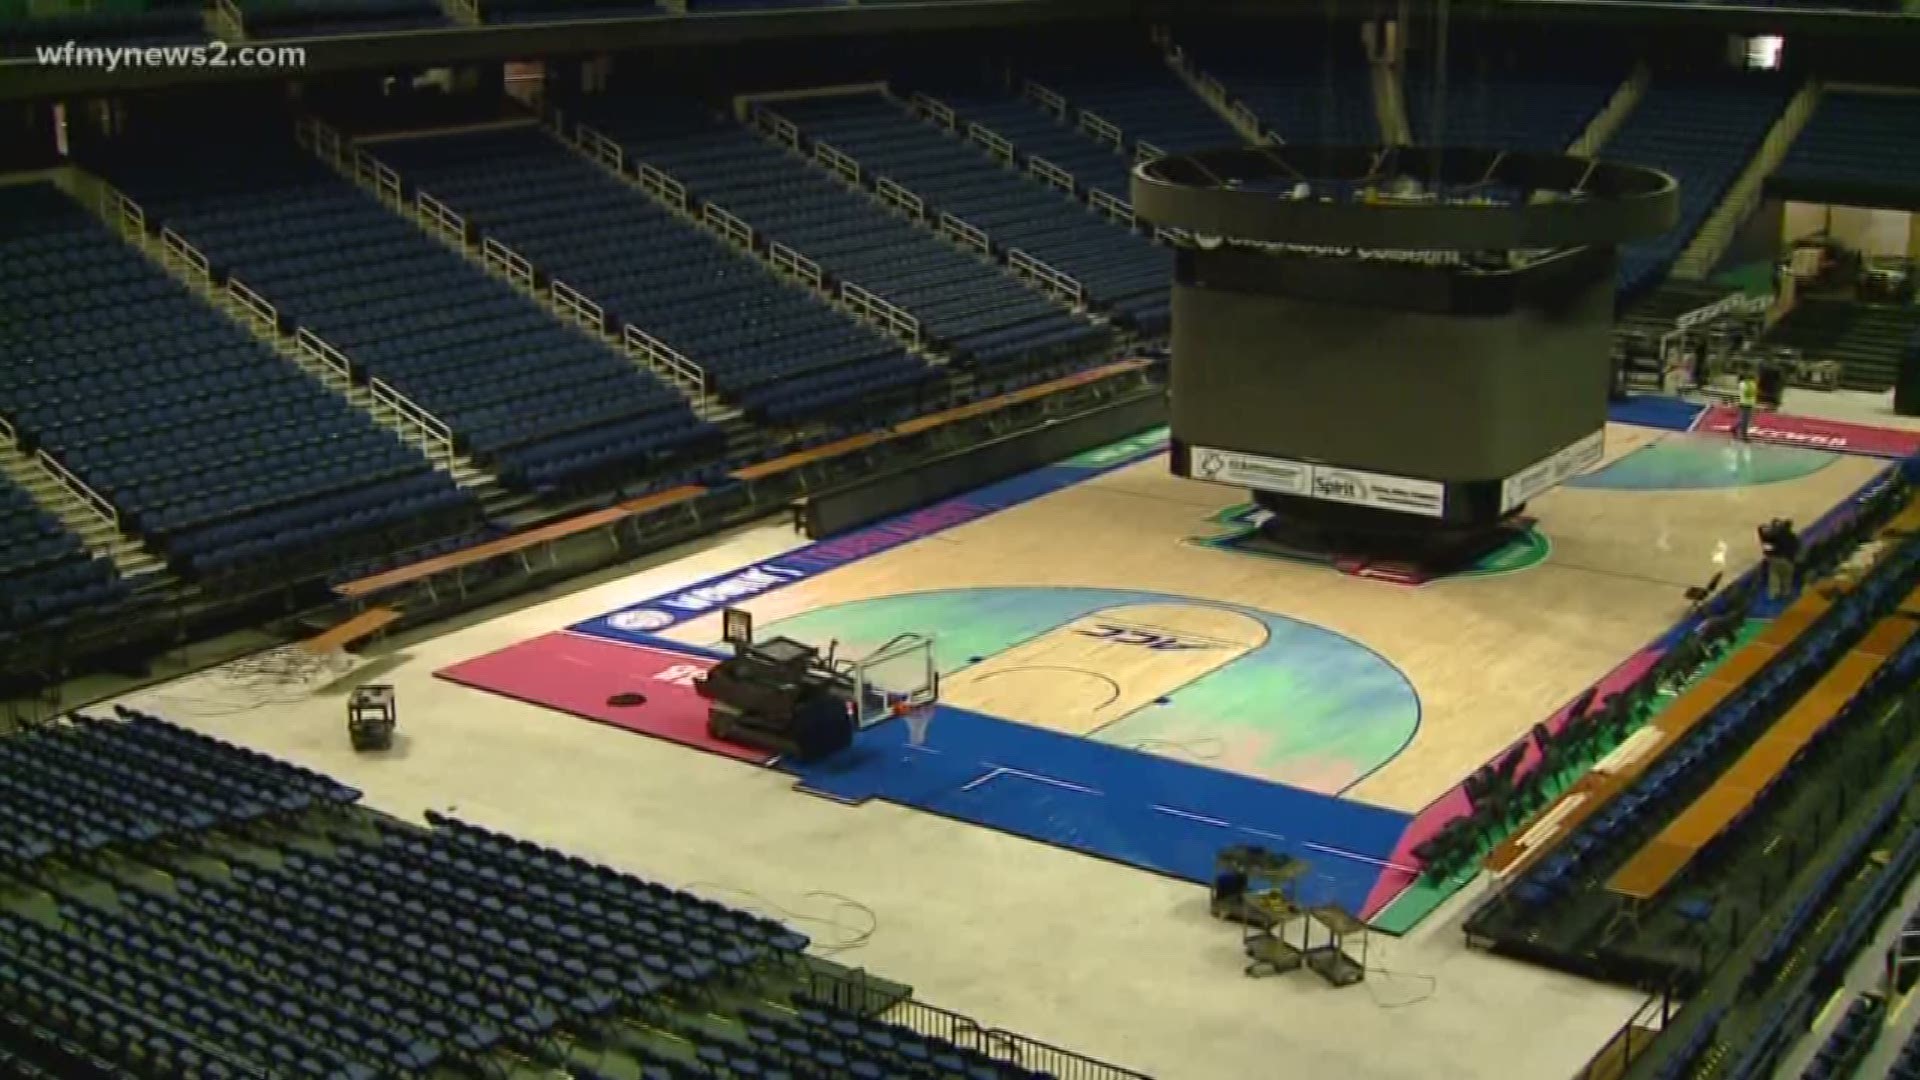 Crews installed the custom floor today as Greensboro hosts its 19th ACC Women's Tourney.